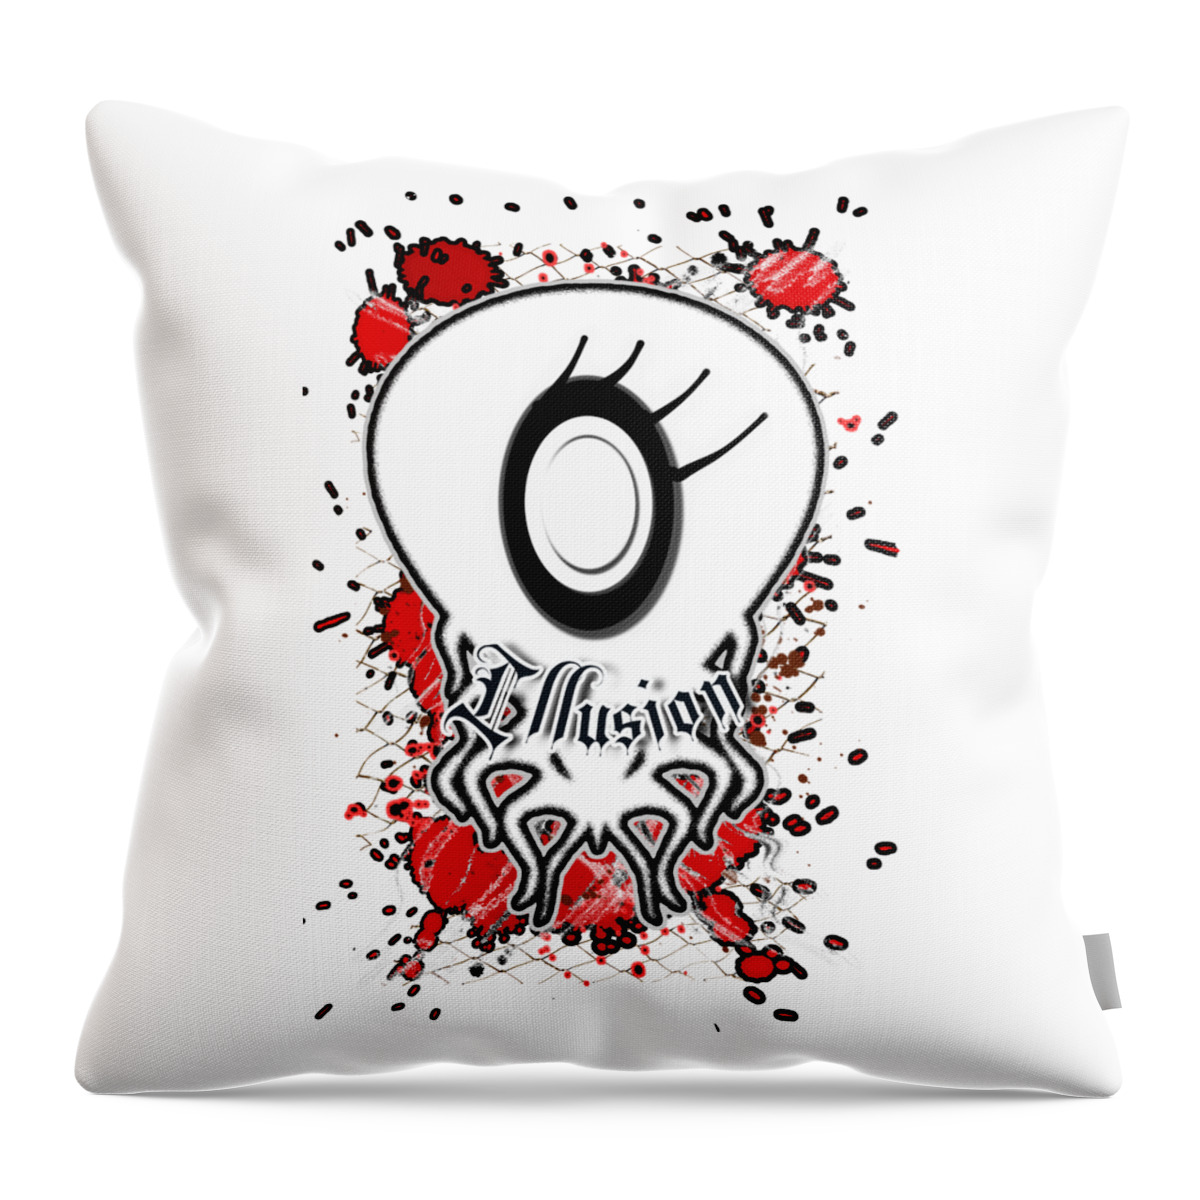 Illusion Throw Pillow featuring the digital art Illusion a Floater Spy Ghost Impression Ghost Hunt Halloween by Delynn Addams